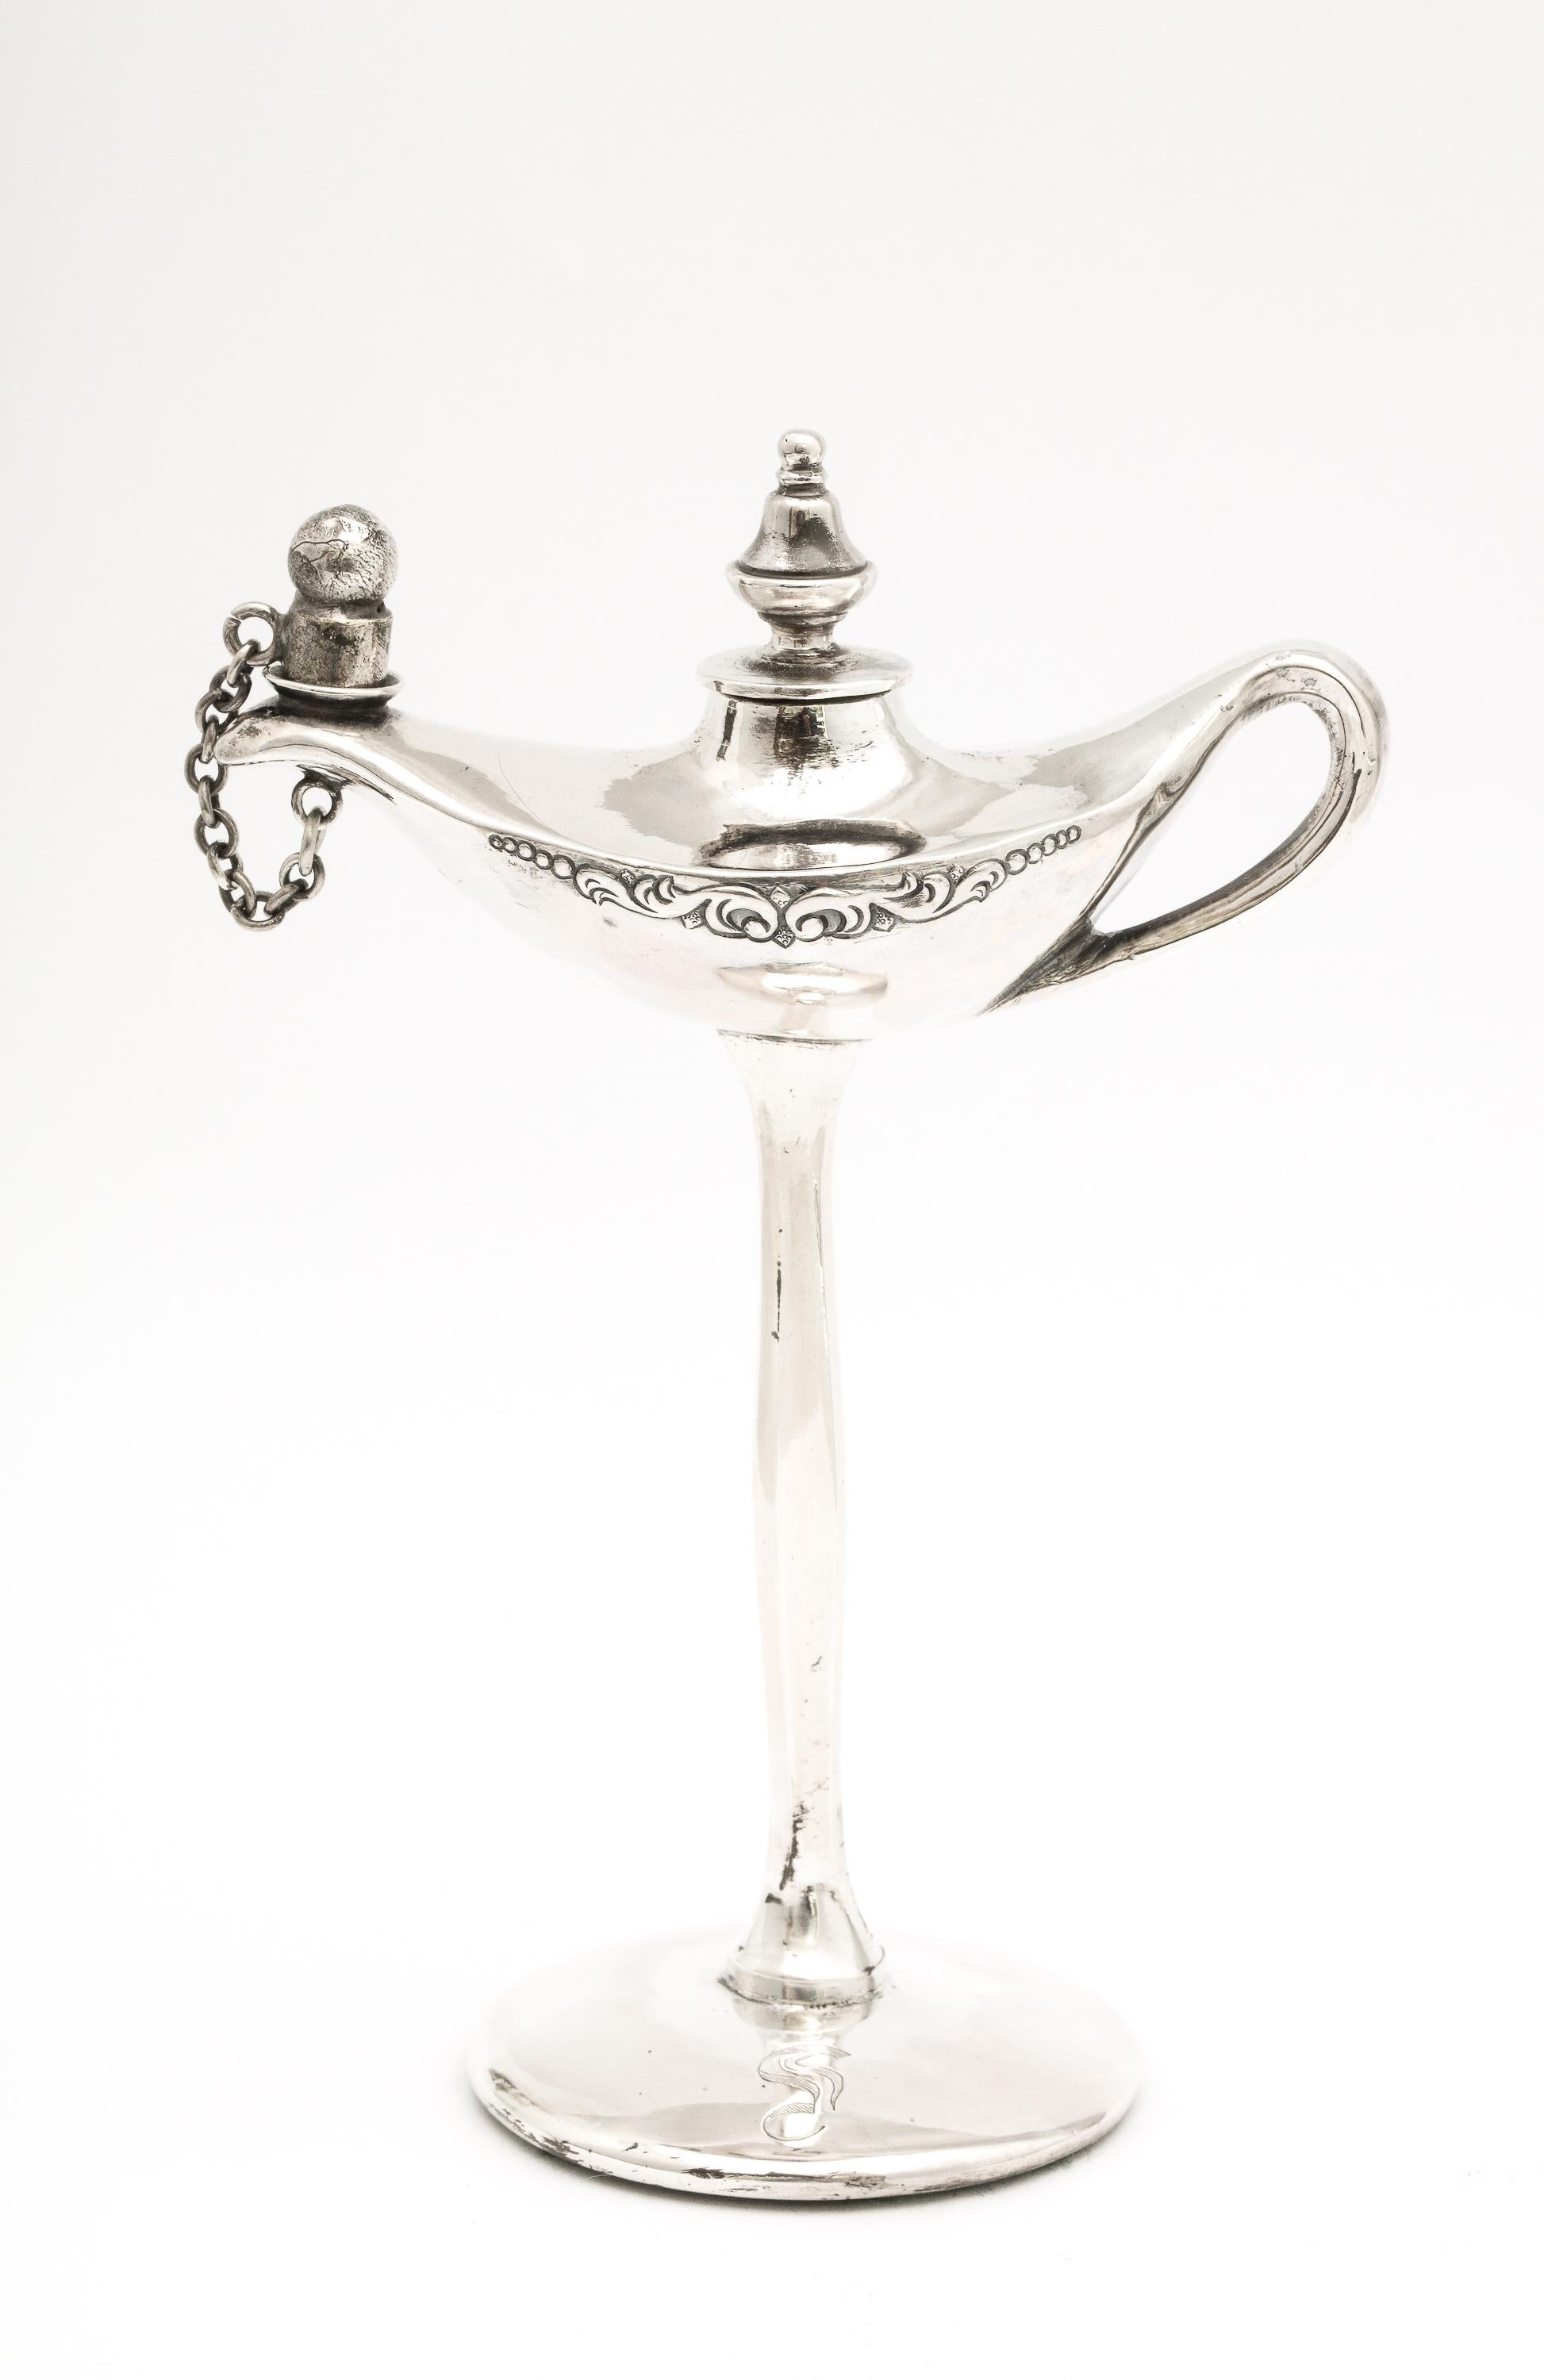 Chinese Export sterling silver Aladdin's lamp - form table lighter on tall pedestal base, China, Ca. 1900. Graceful design. Measures 5 1/4 inches high x 3 1/2 inches wide from outer edge of handle to outed edge of lighter x 2 inches diameter across